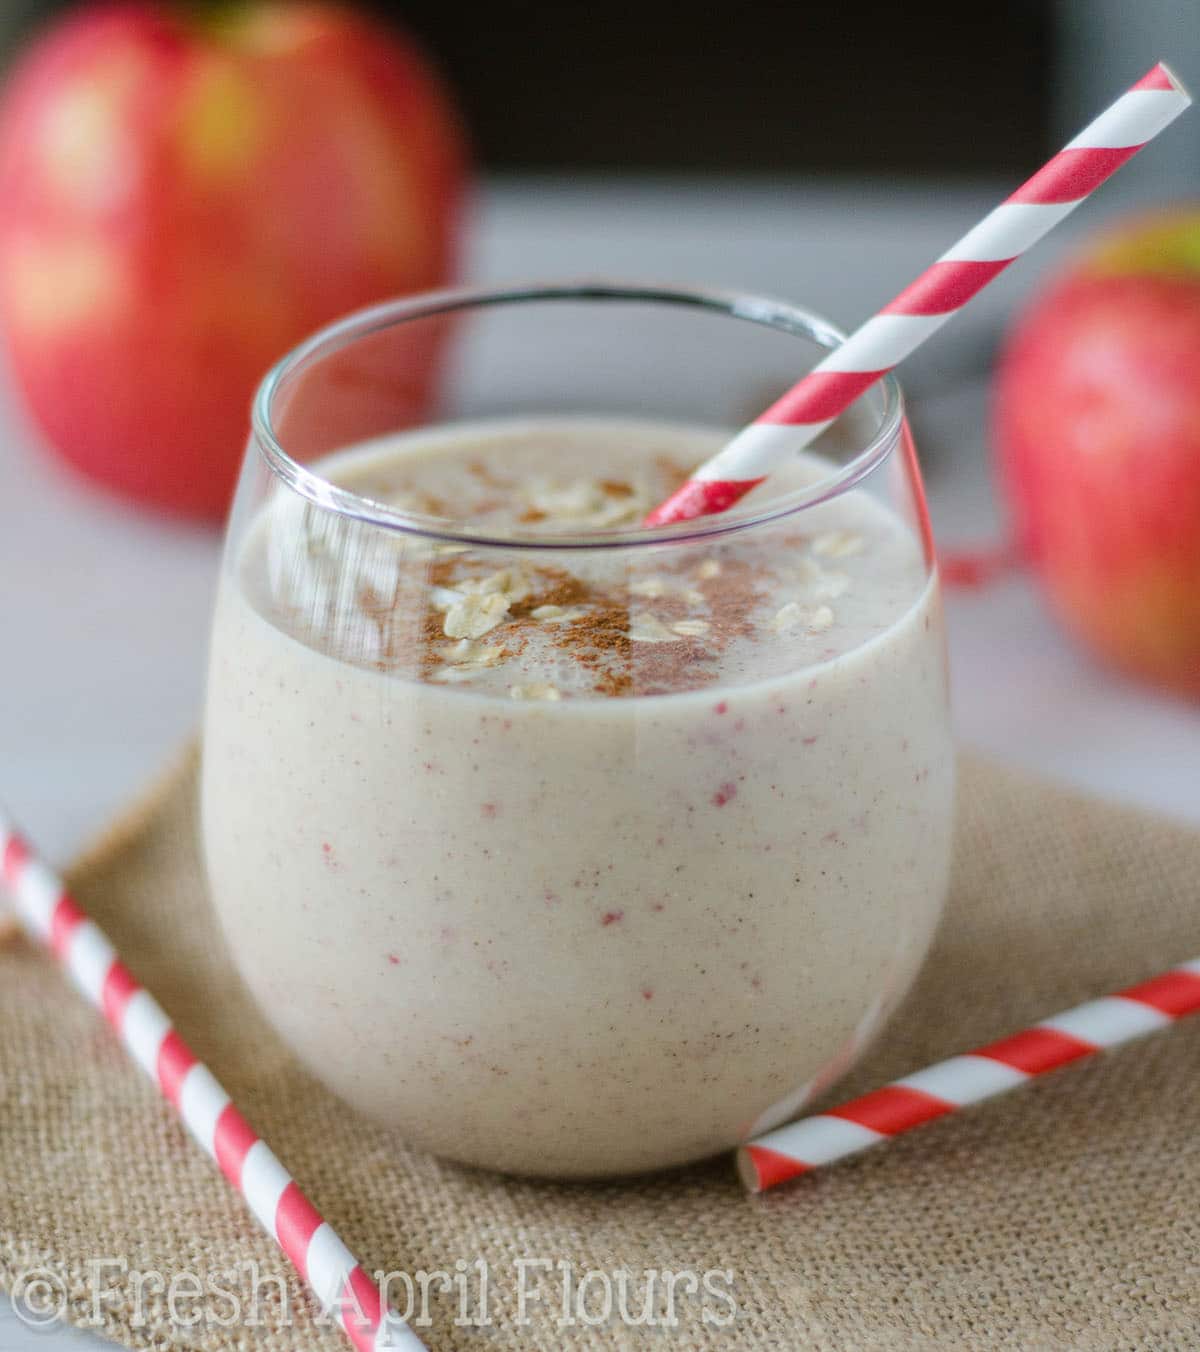 An apple pie smoothie in a glass with a straw.